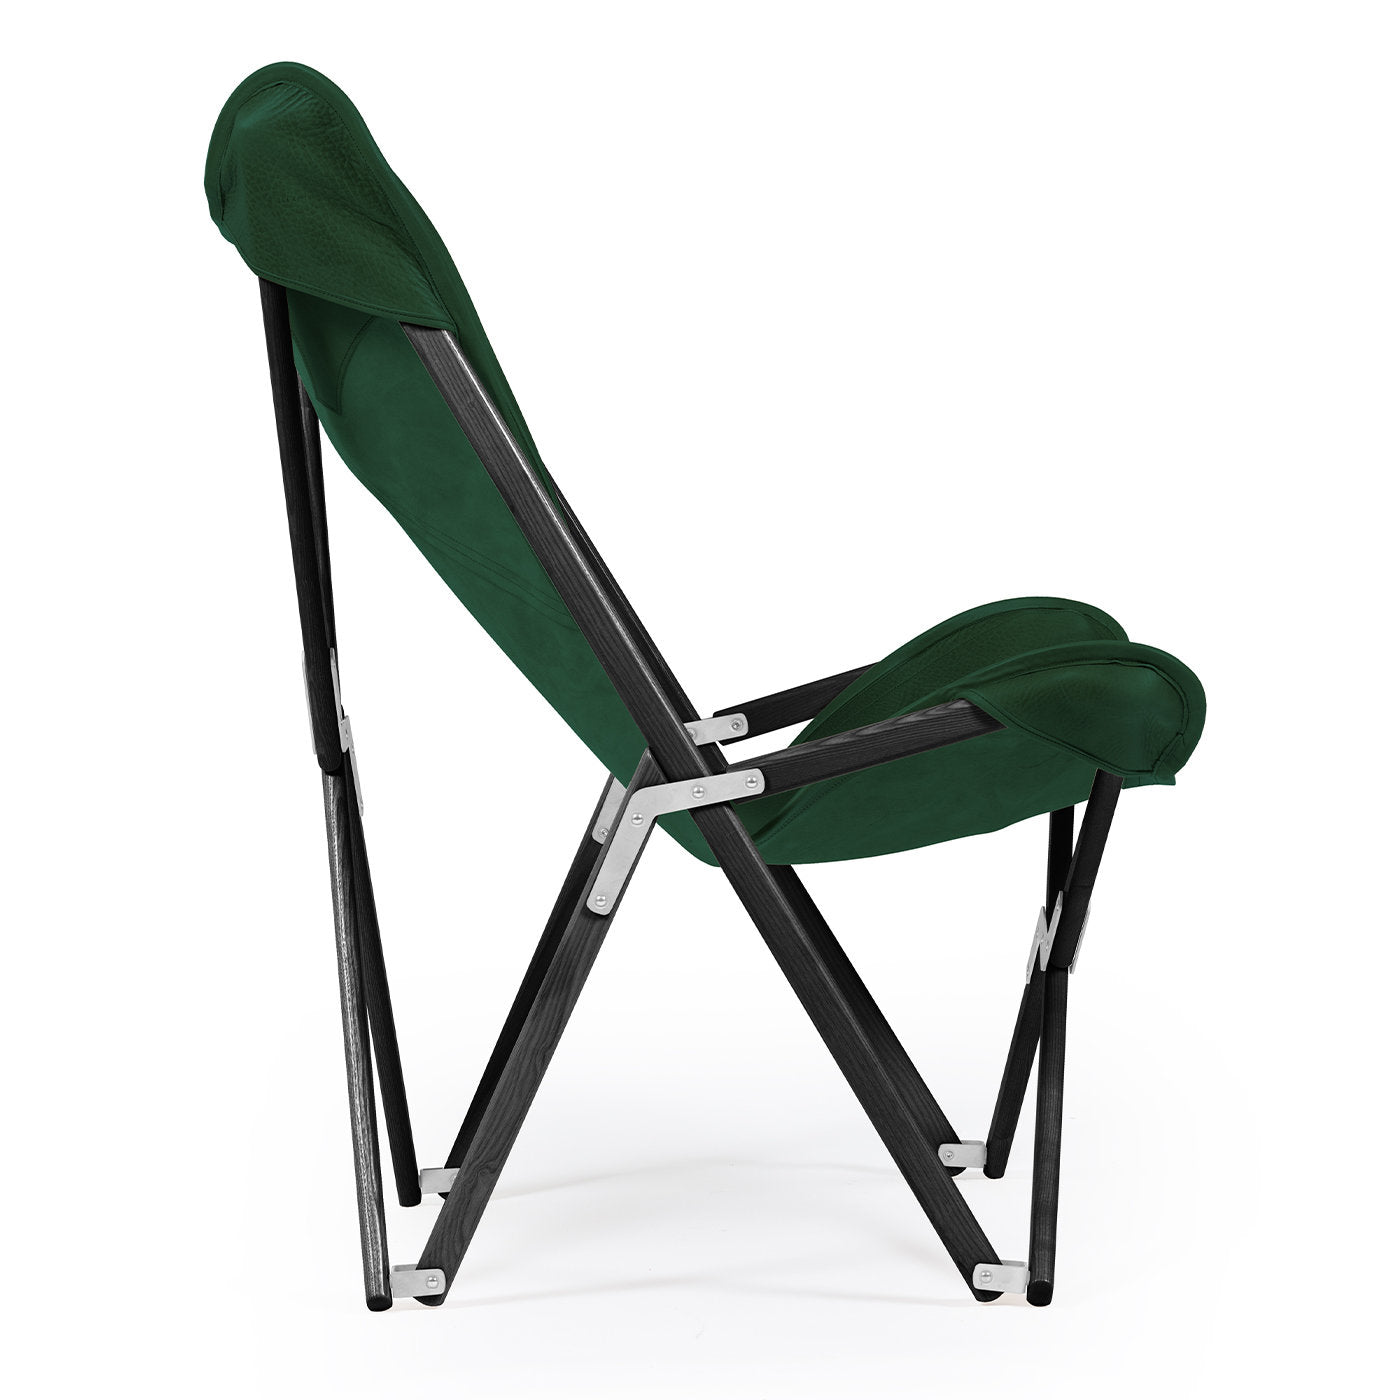 Tripolina Armchair in Green Leather - Alternative view 1